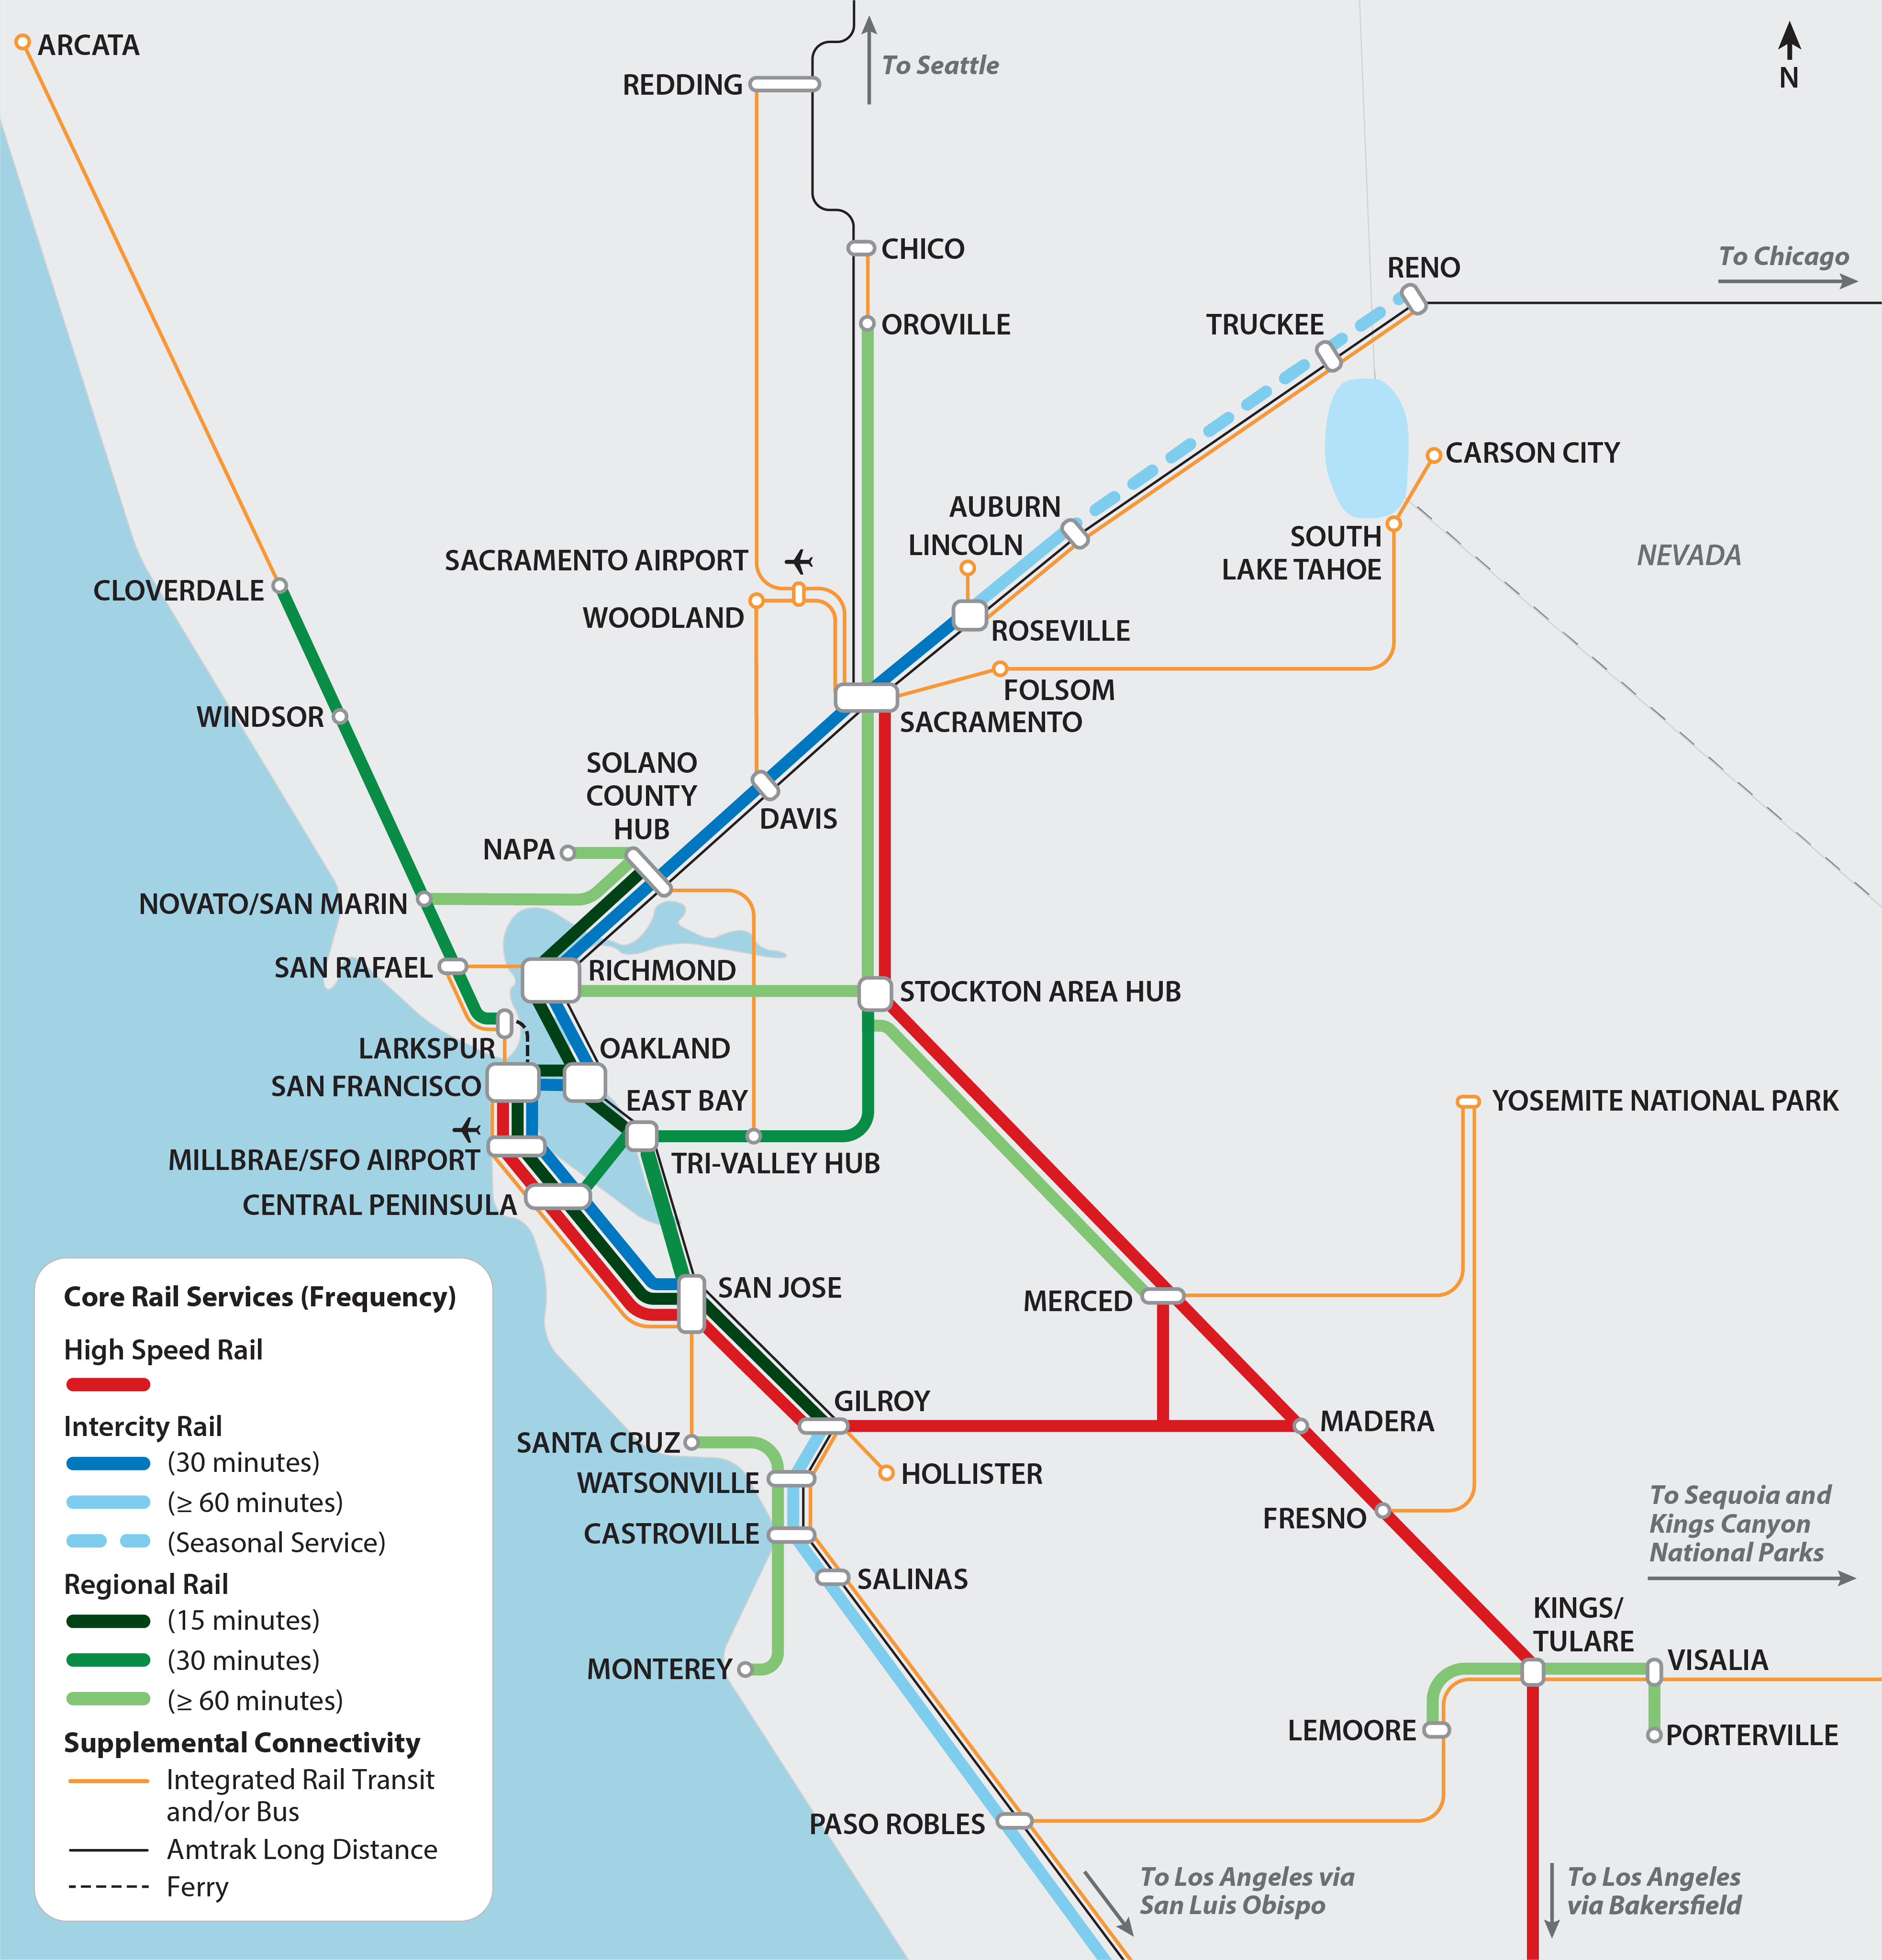 Image of a map showing the Northern California Integrated Rail Network from the 2018 California State Rail Plan. Rail network services shown include High Speed Rail, Intercity Rail, Regional Rail, and Supplemental Connectivity.